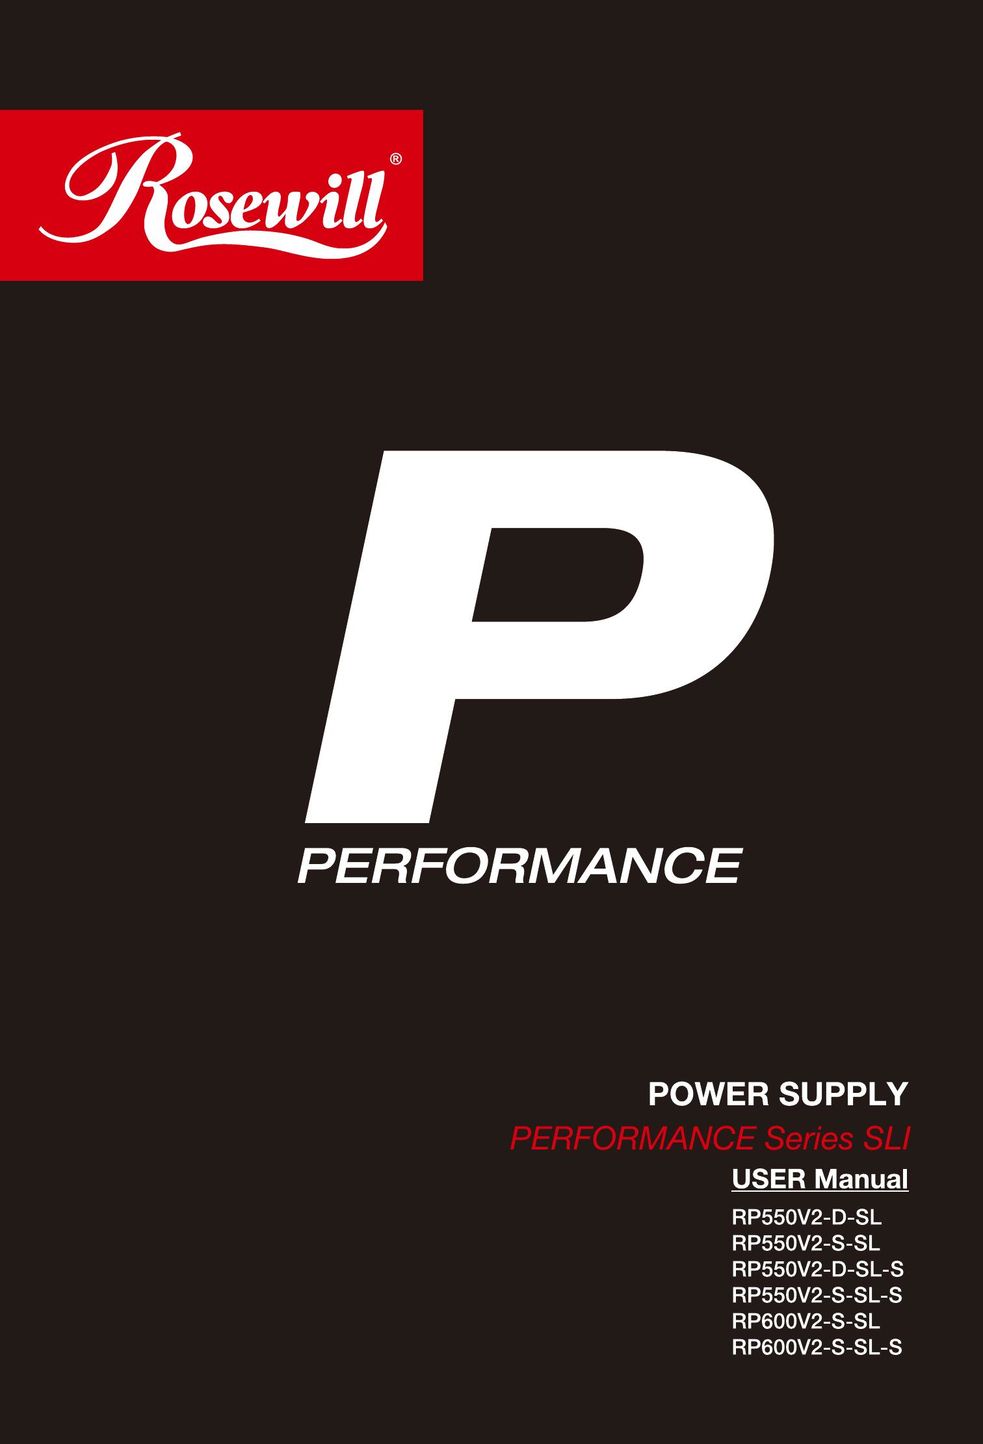 Rosewill RP600V2-S-SL-S Power Supply User Manual